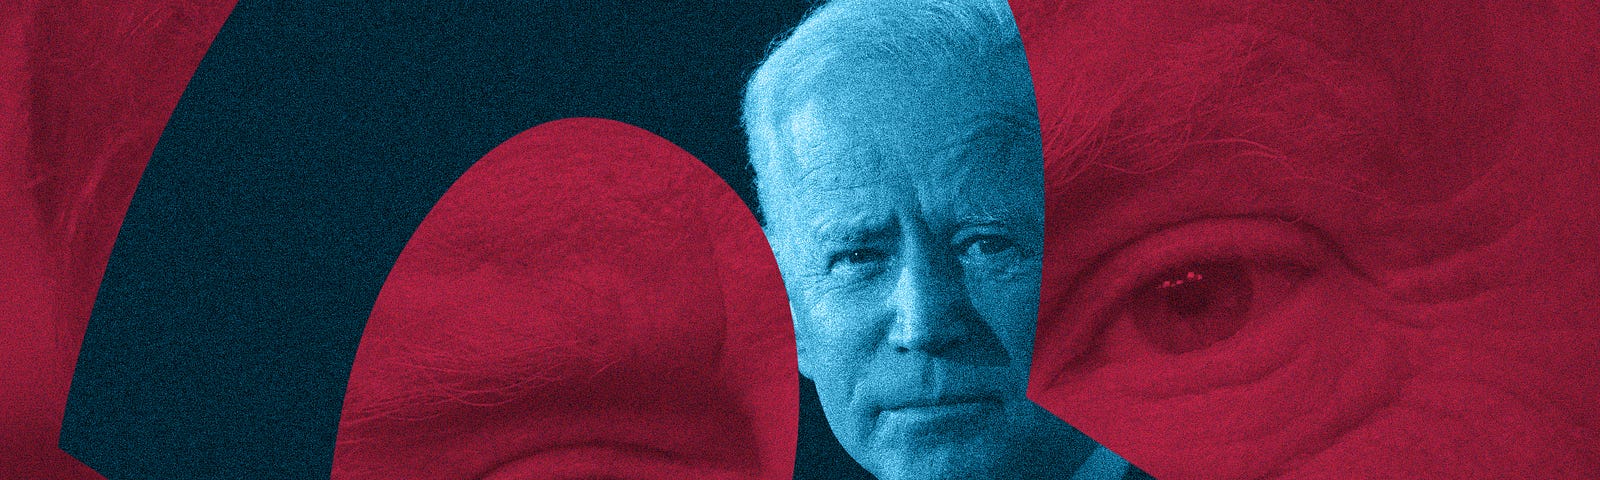 Red background close-up of Trump’s face against a question mark-shaped blue cut out of Joe Biden in foreground.